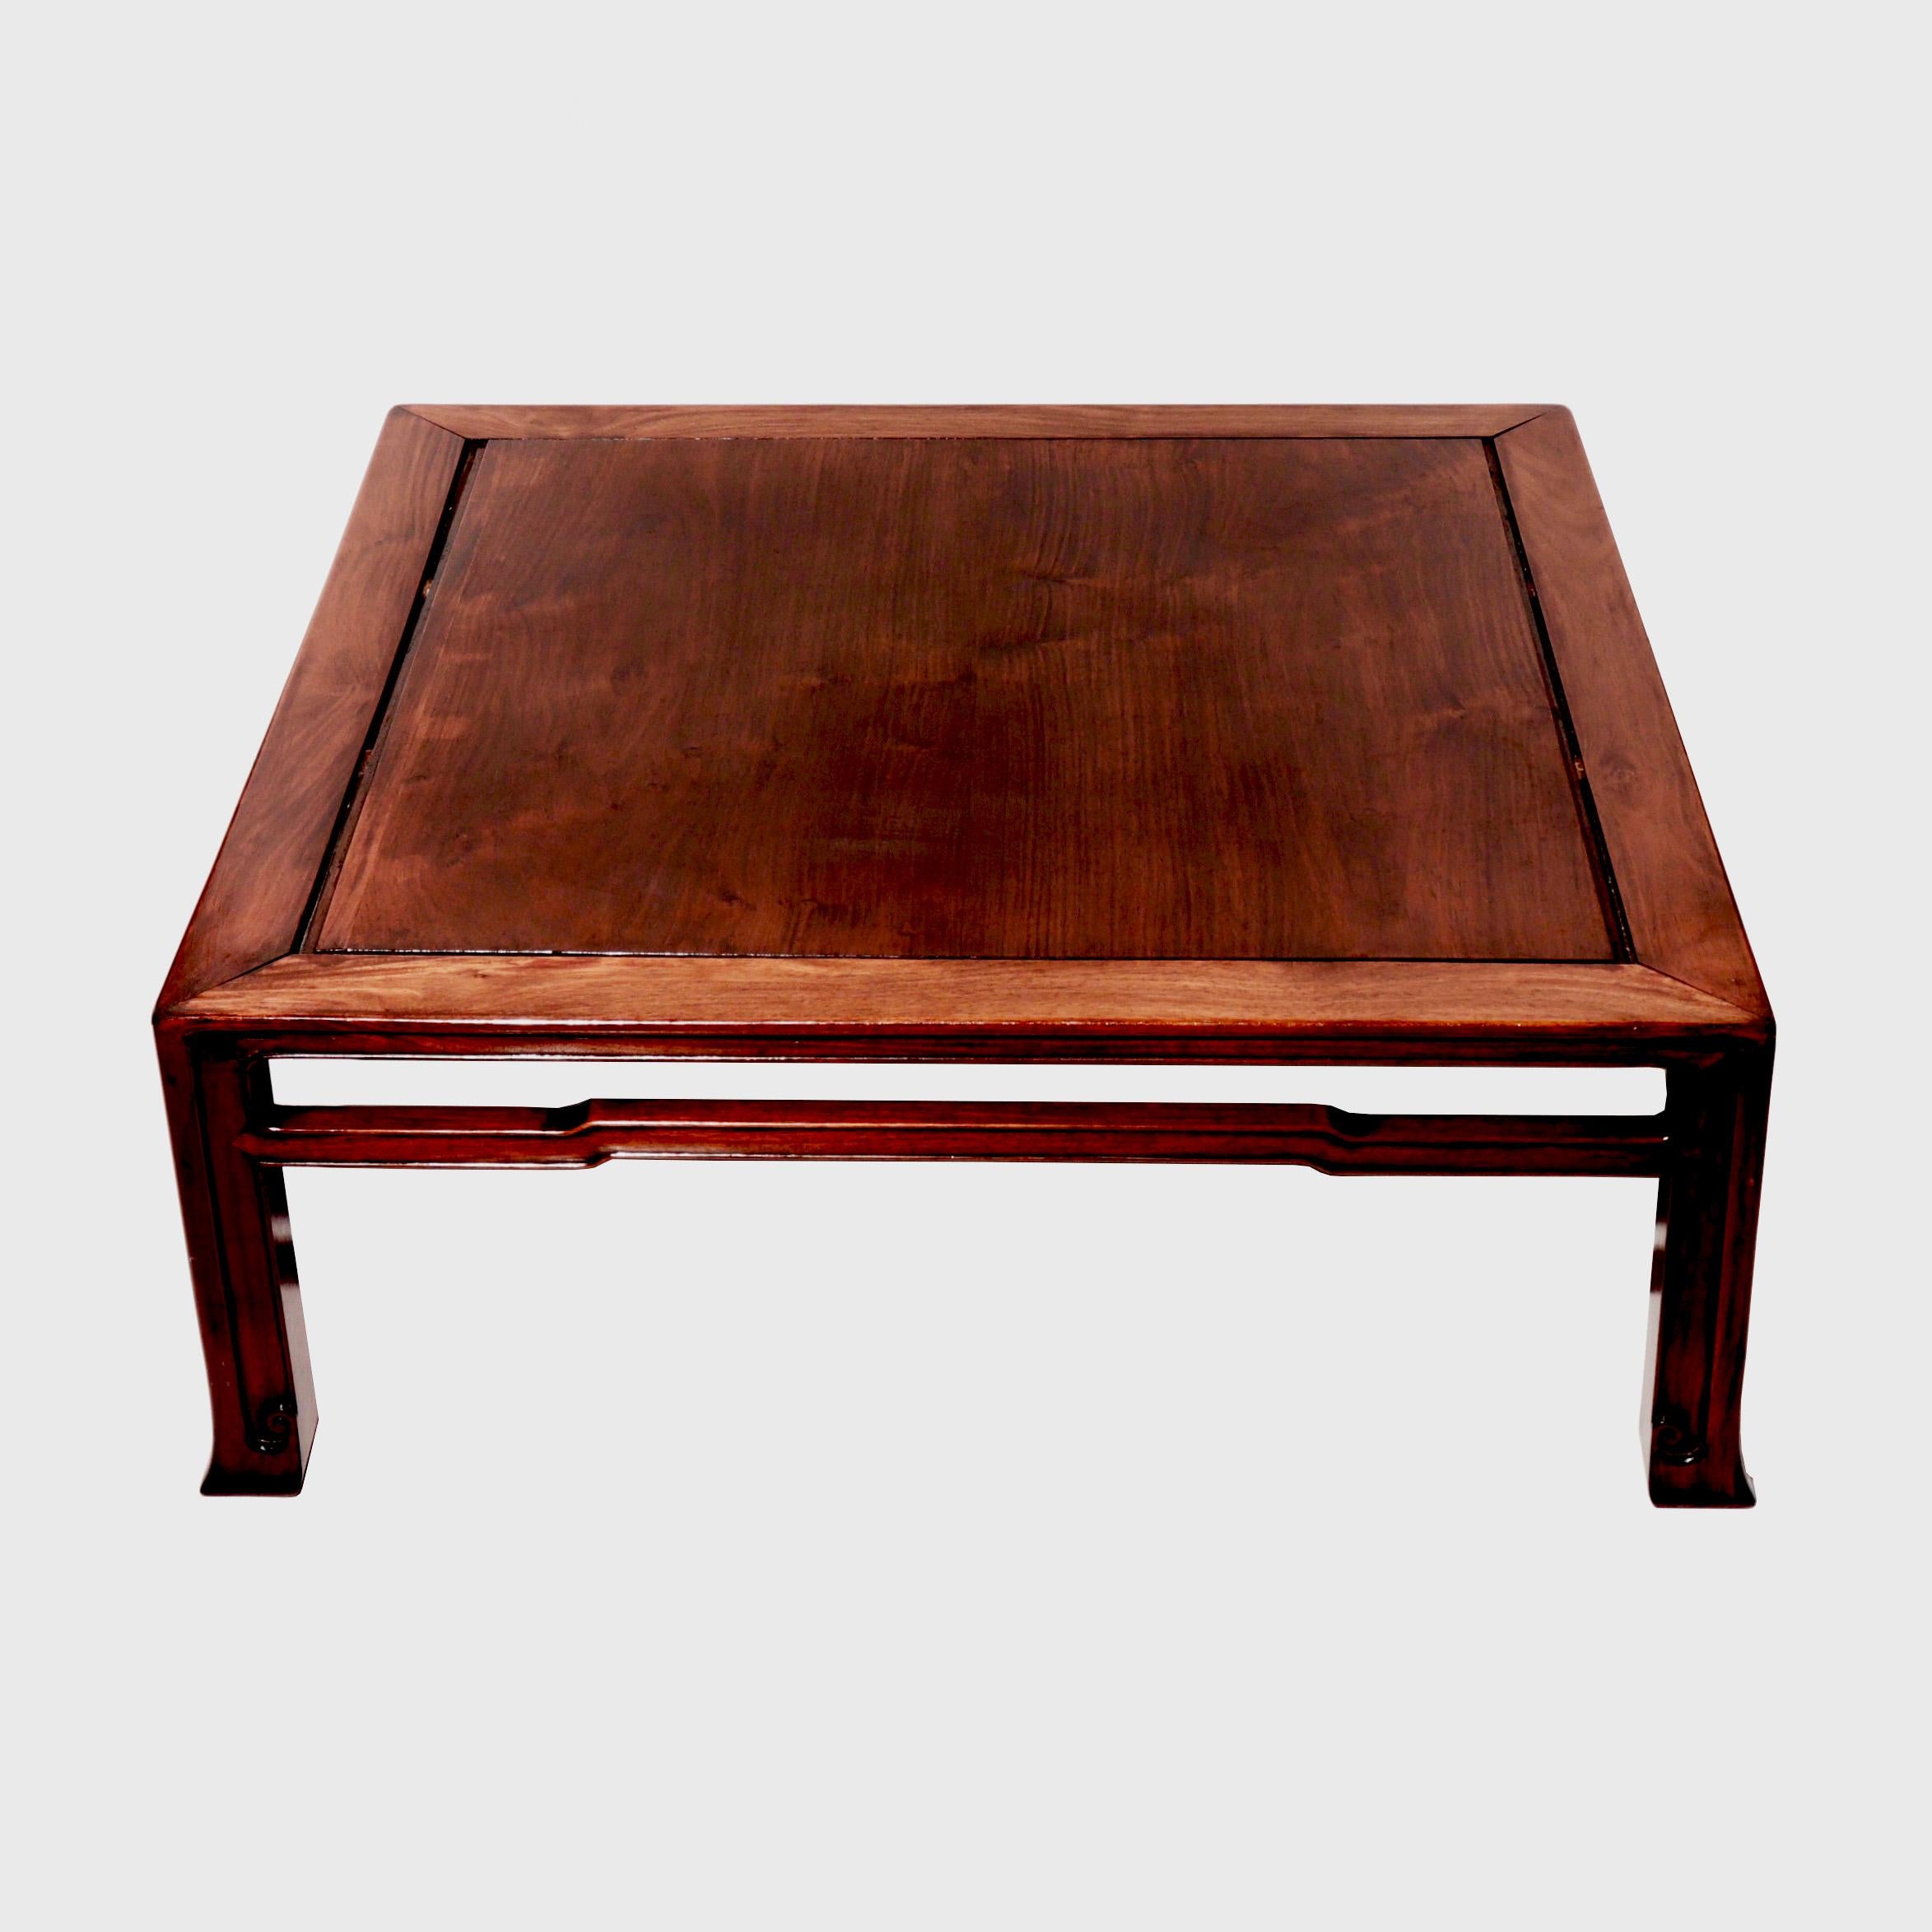 Japanese Rosewood Square Tea Table In Good Condition For Sale In Point Richmond, CA